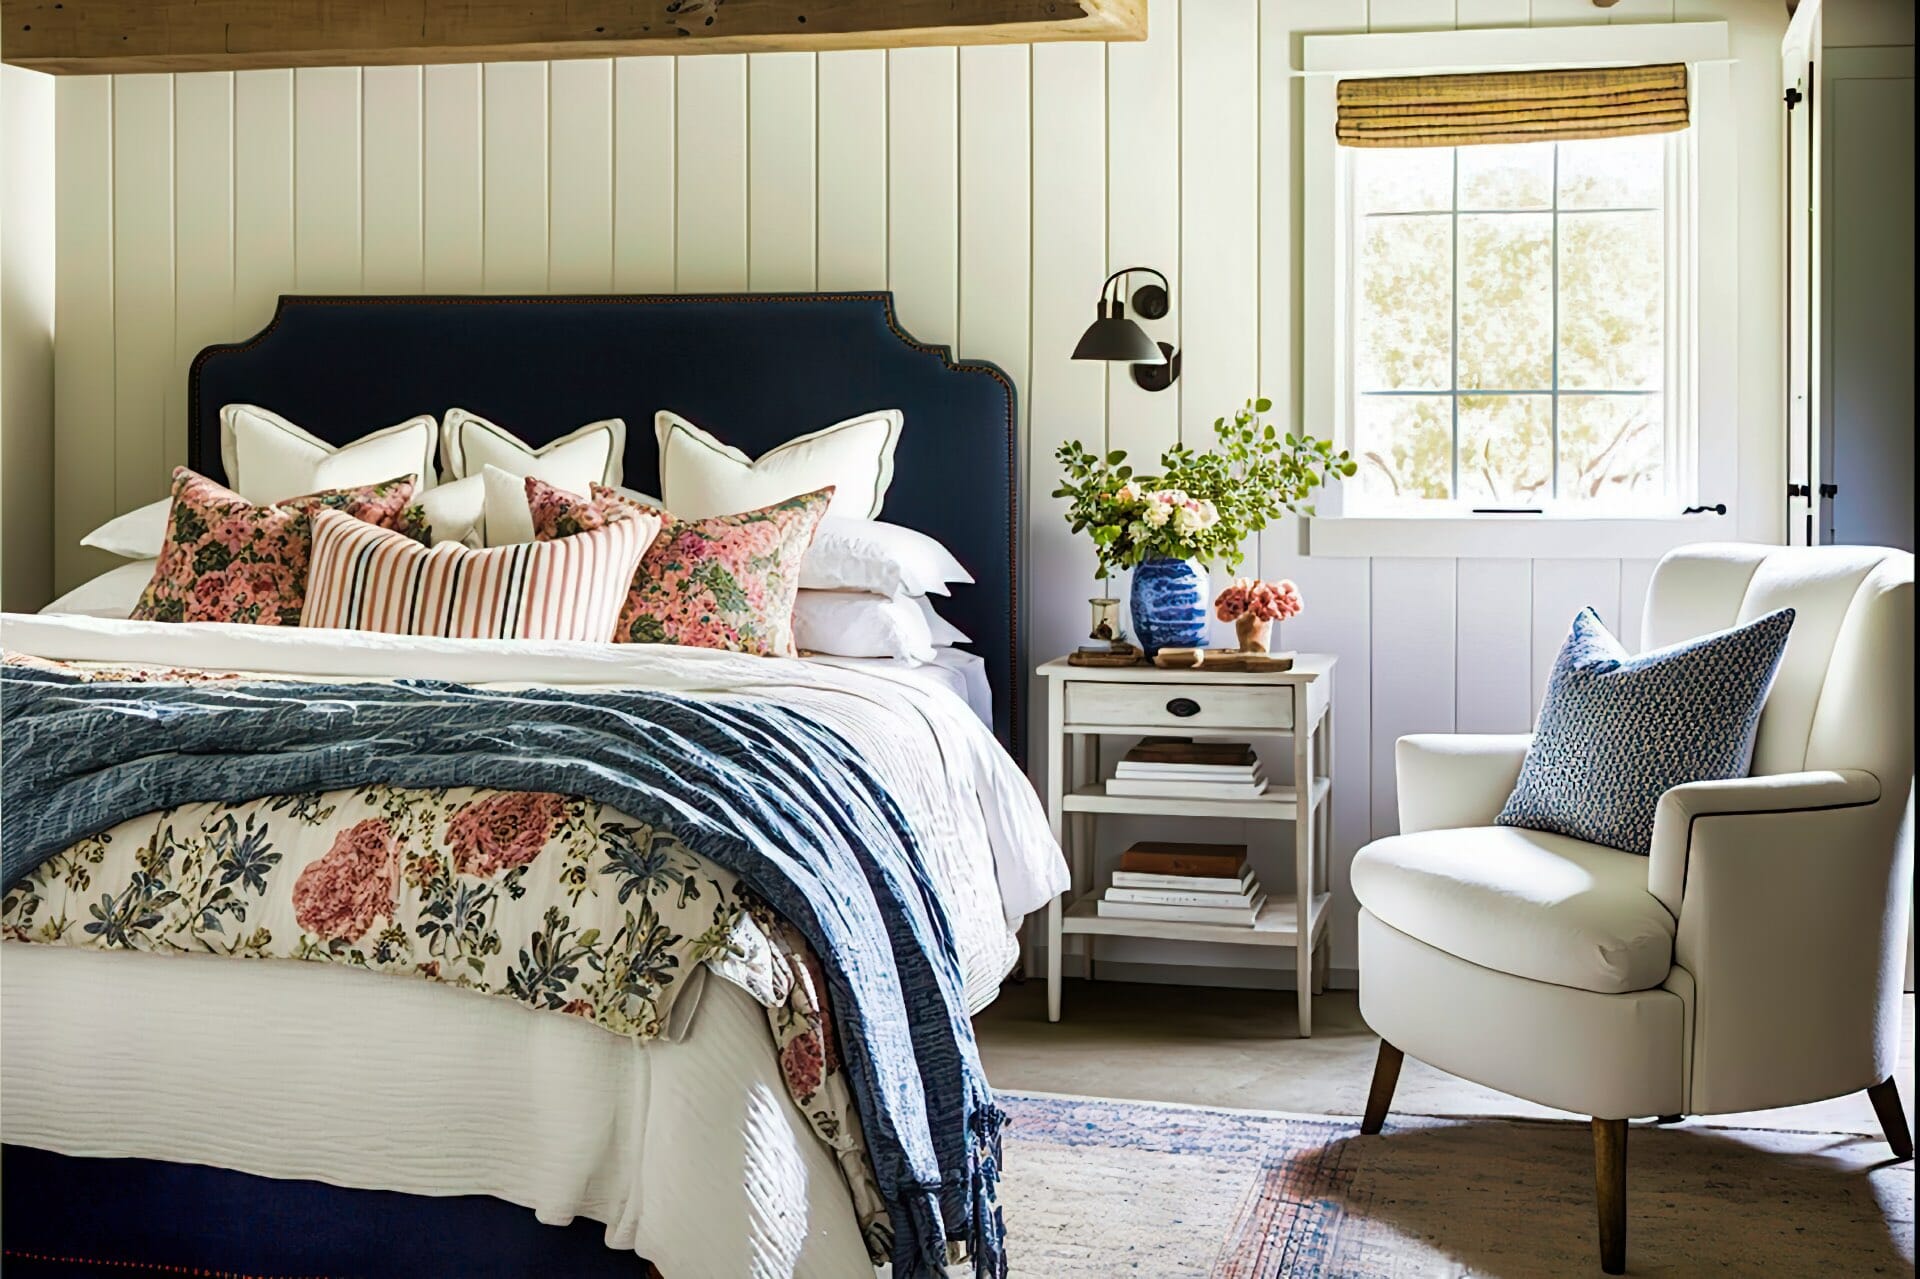 Cottage Style Bedroom With White Paneled Walls, Exposed Beam Ceiling, And A Cozy Queen Size Bed With A White Washed Wood Headboard. A Plush Navy Blue Throw Blanket Is Draped Across The Foot Of The Bed, And A Collection Of Patterned Throw Pillows Add A Pop Of Color. A Distressed White Nightstand With A Matching Lamp Sits Beside The Bed, And A Wicker Armchair With A Colorful Floral Cushion Is Tucked Into The Corner. A Braided Rug In Shades Of Blue And White Anchors The Space, And A Wooden Ladder Leaning Against The Wall Serves As A Makeshift Bookshelf.